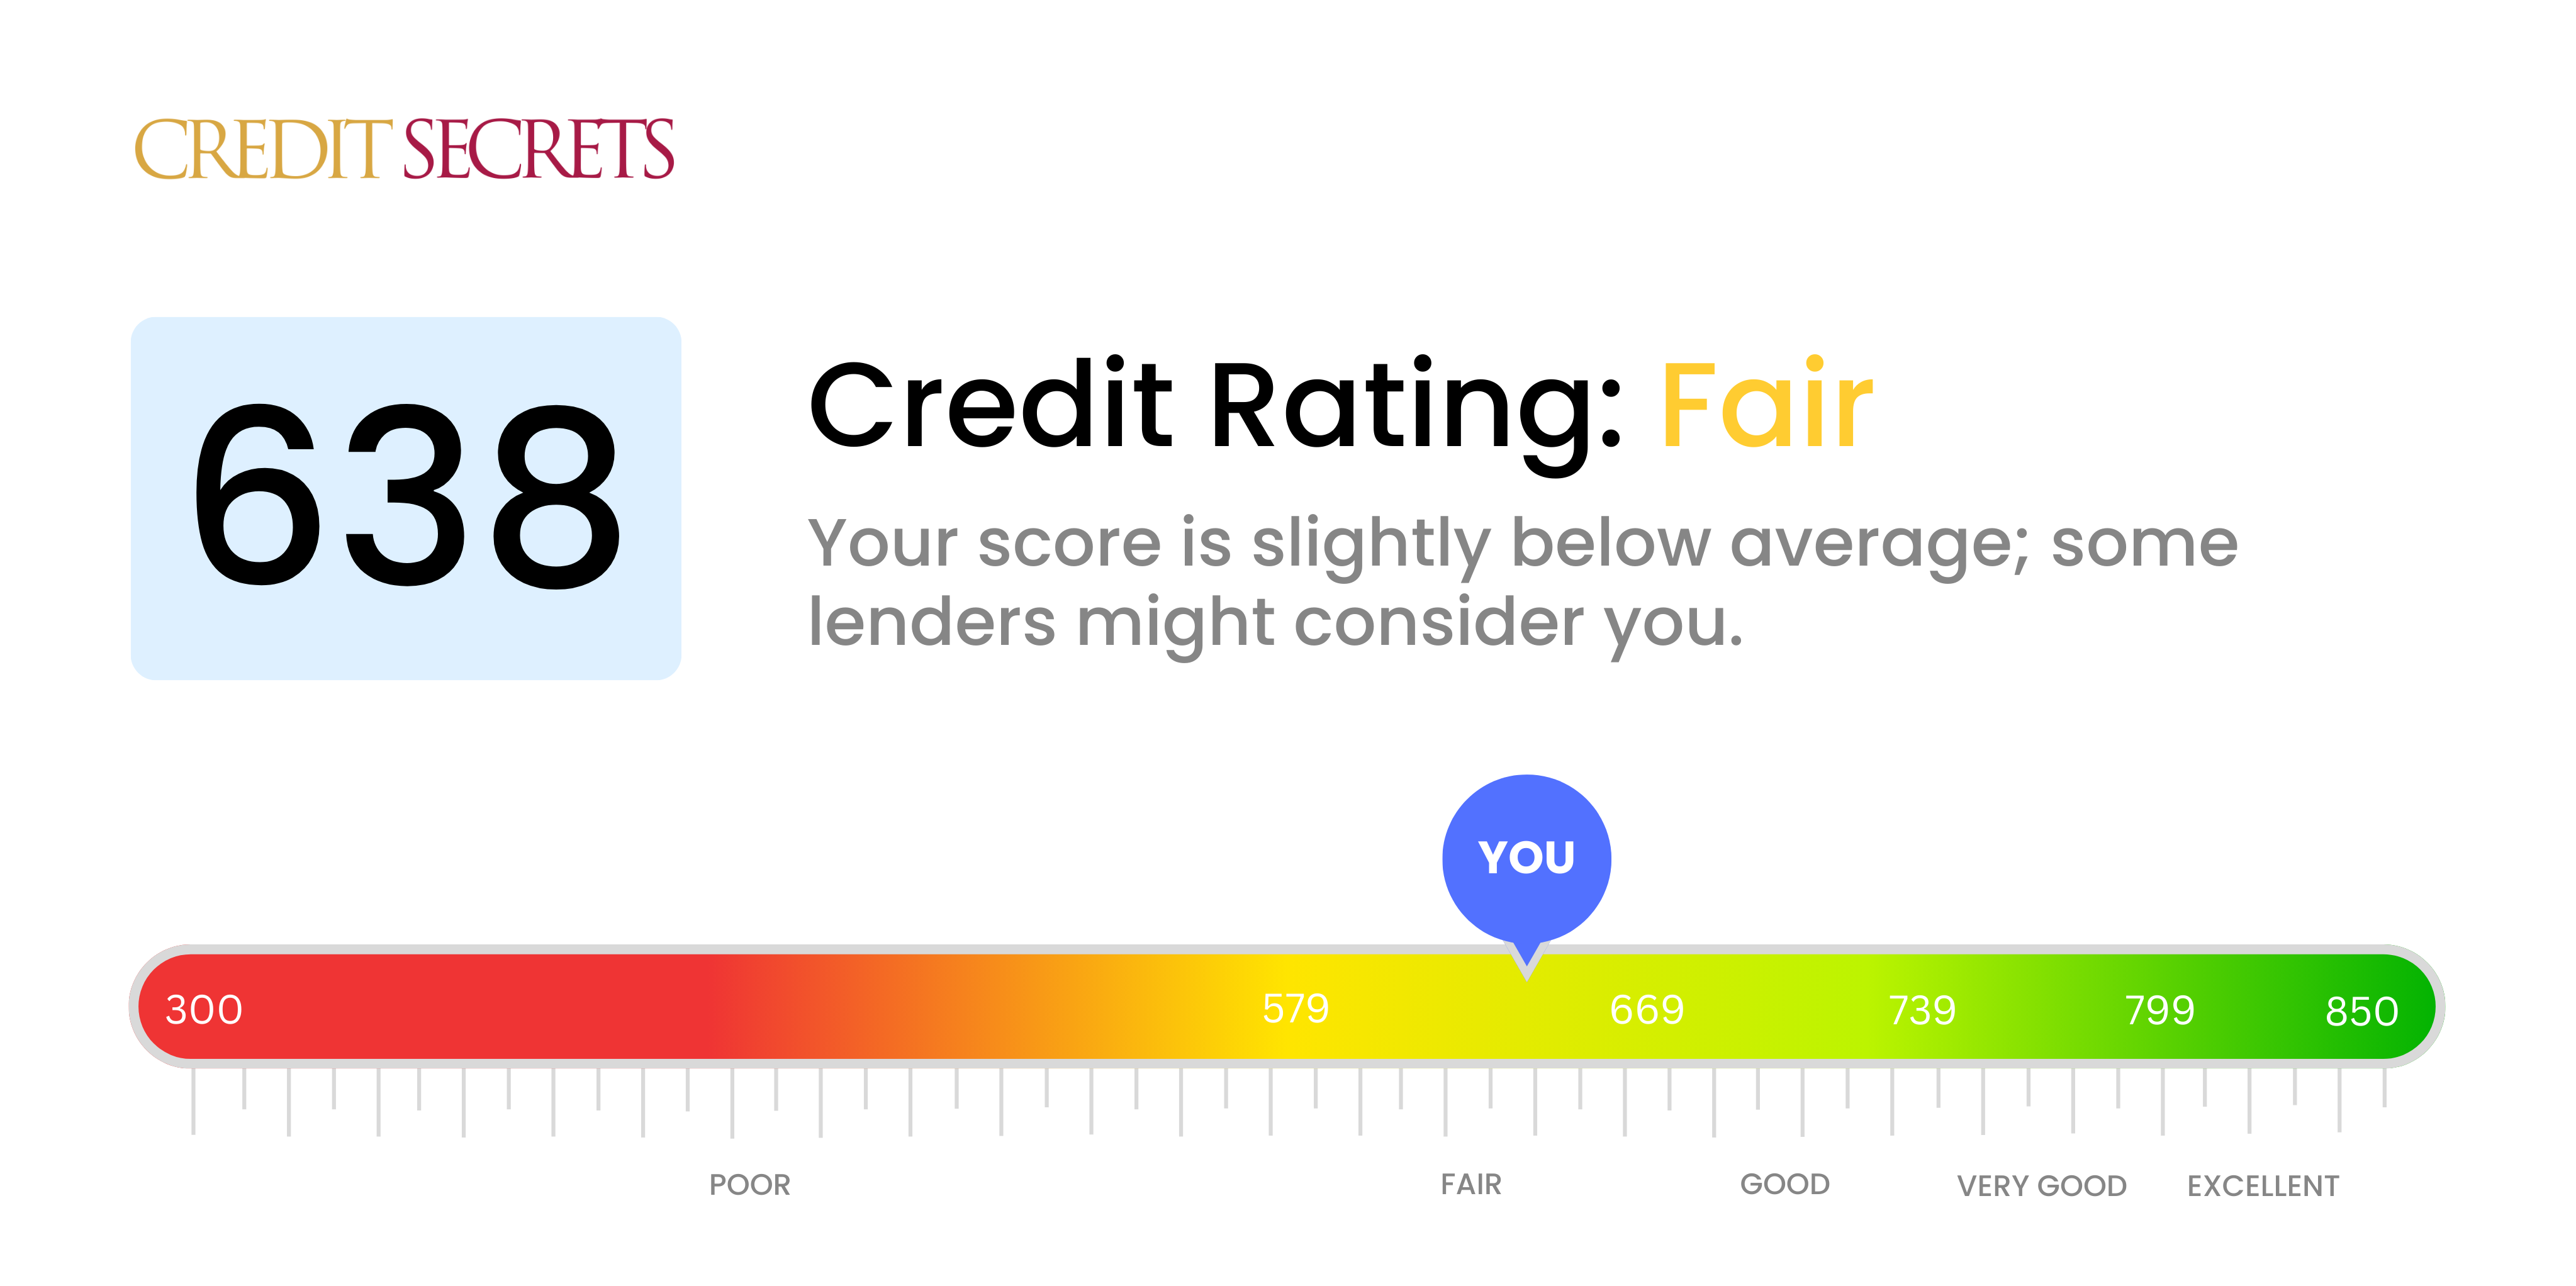 Is 638 a good credit score?